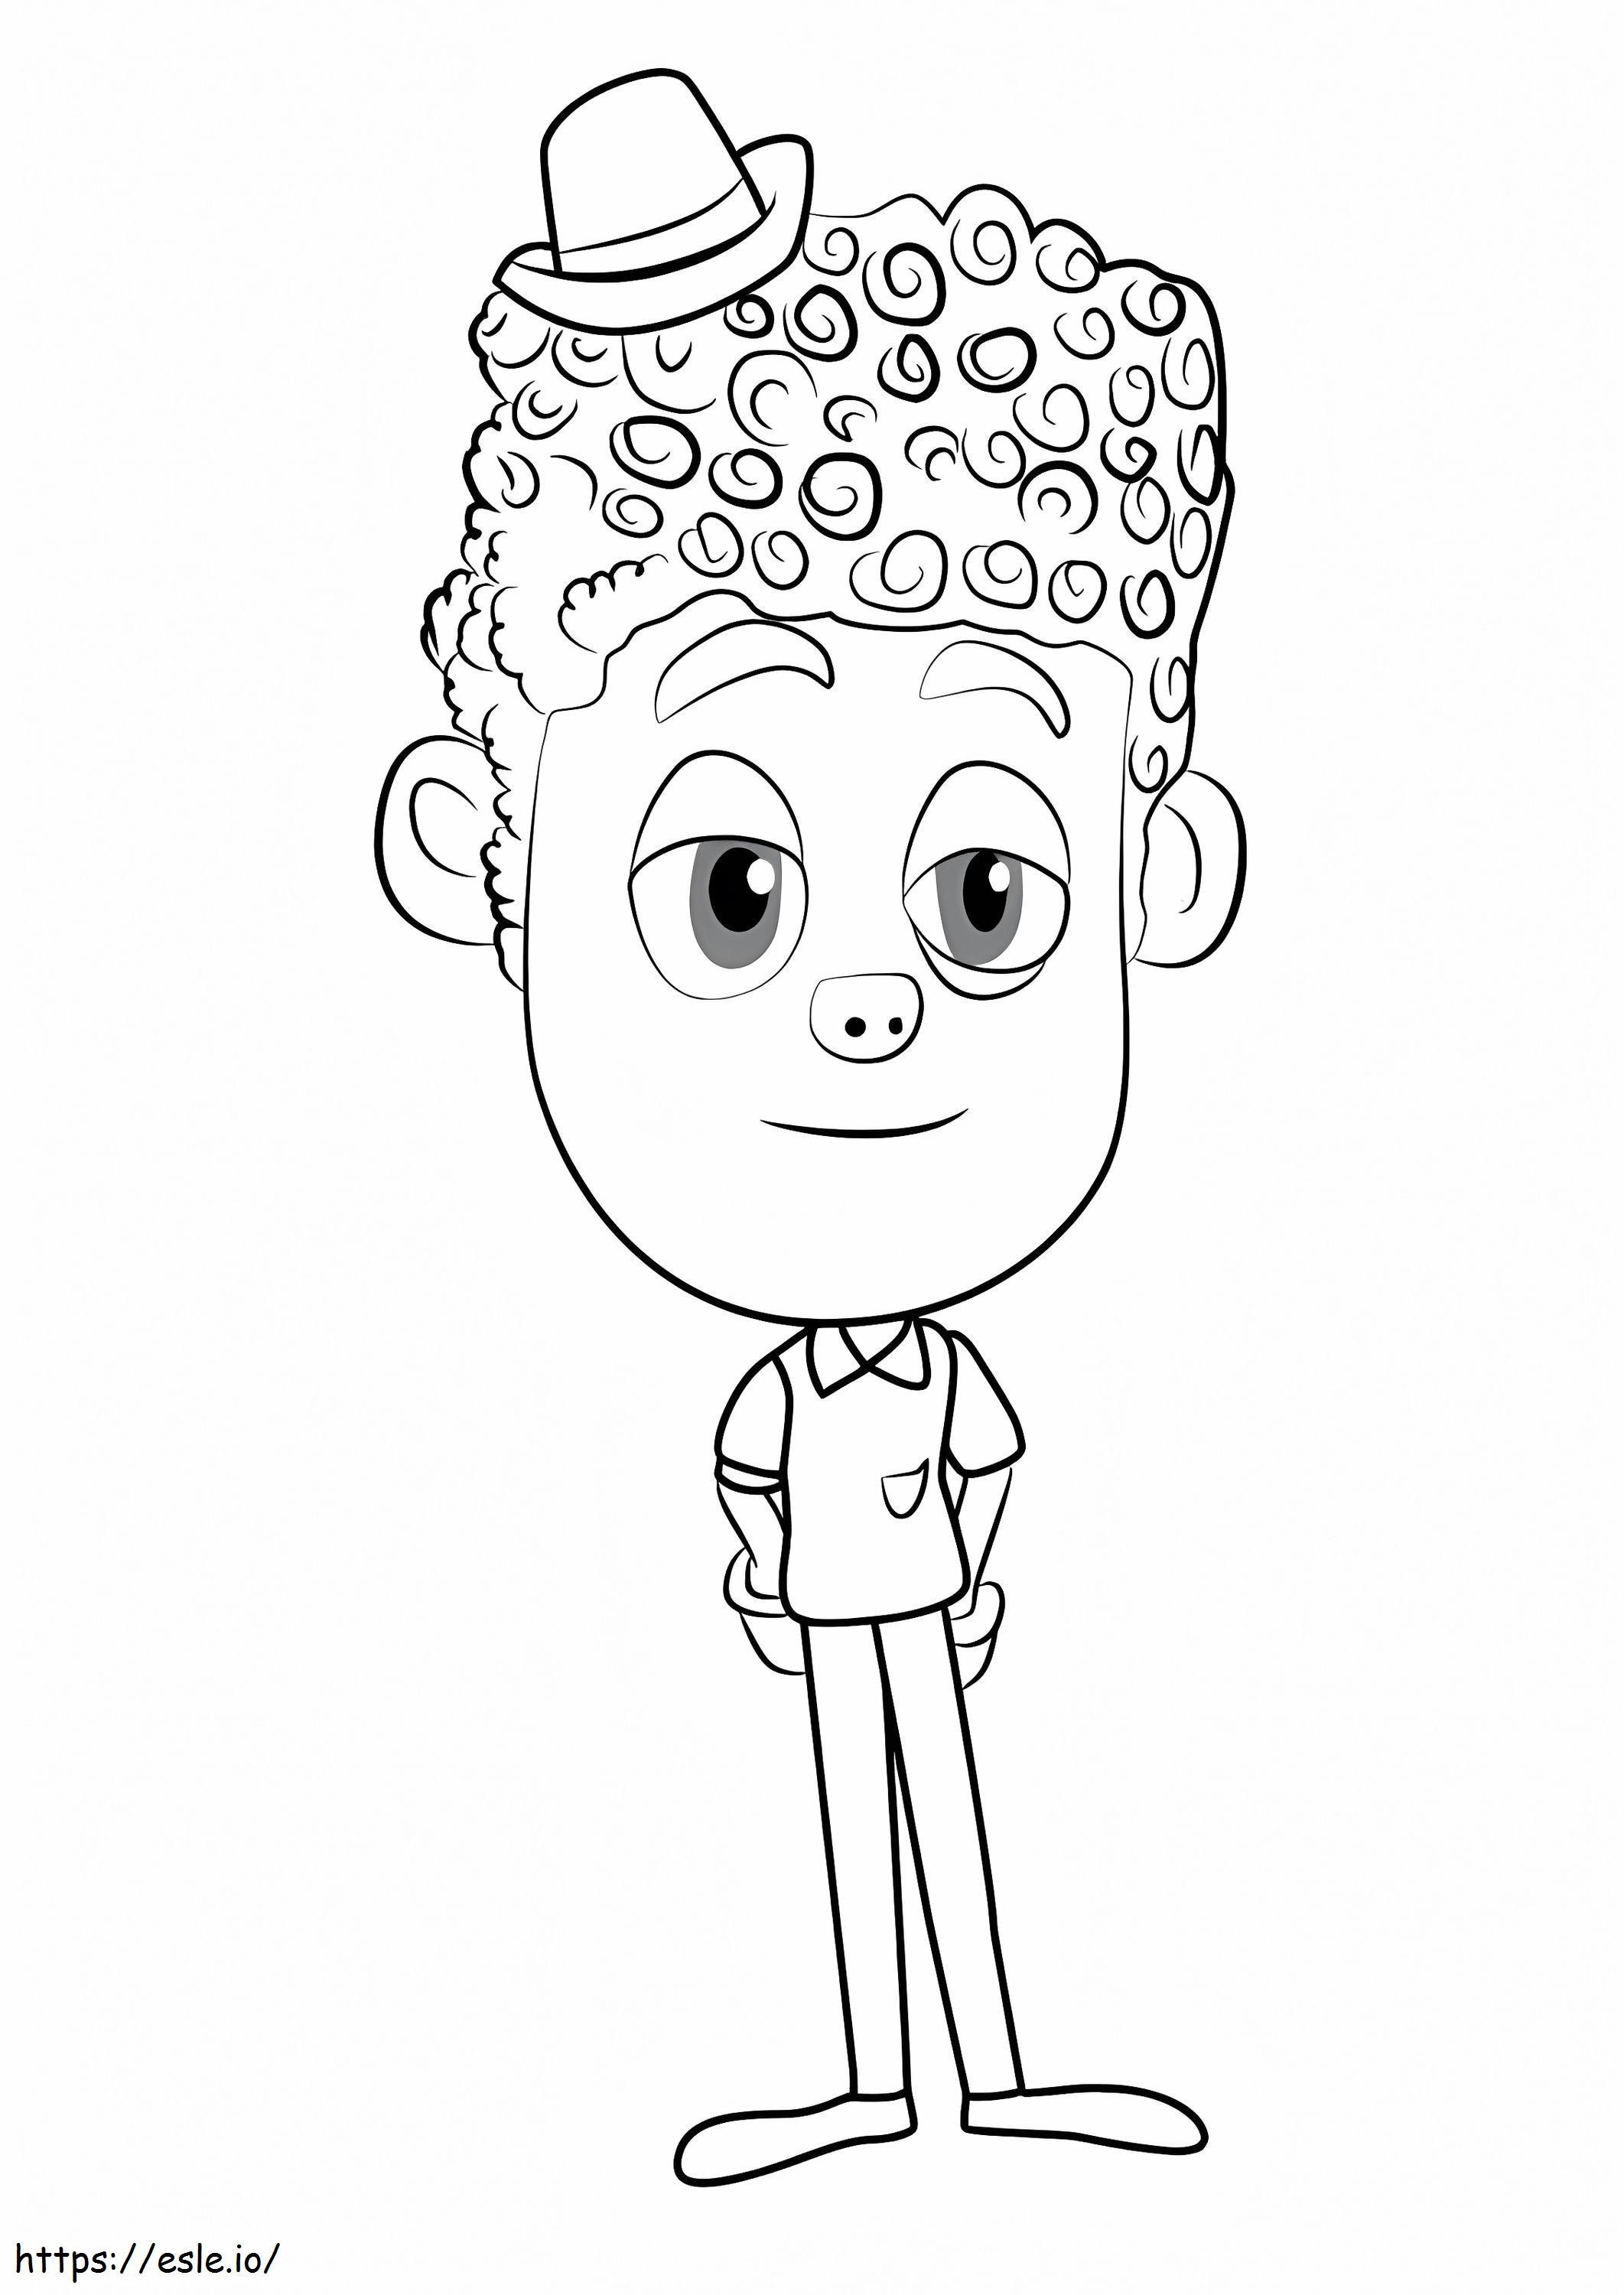 Joao From The Book Of Life coloring page